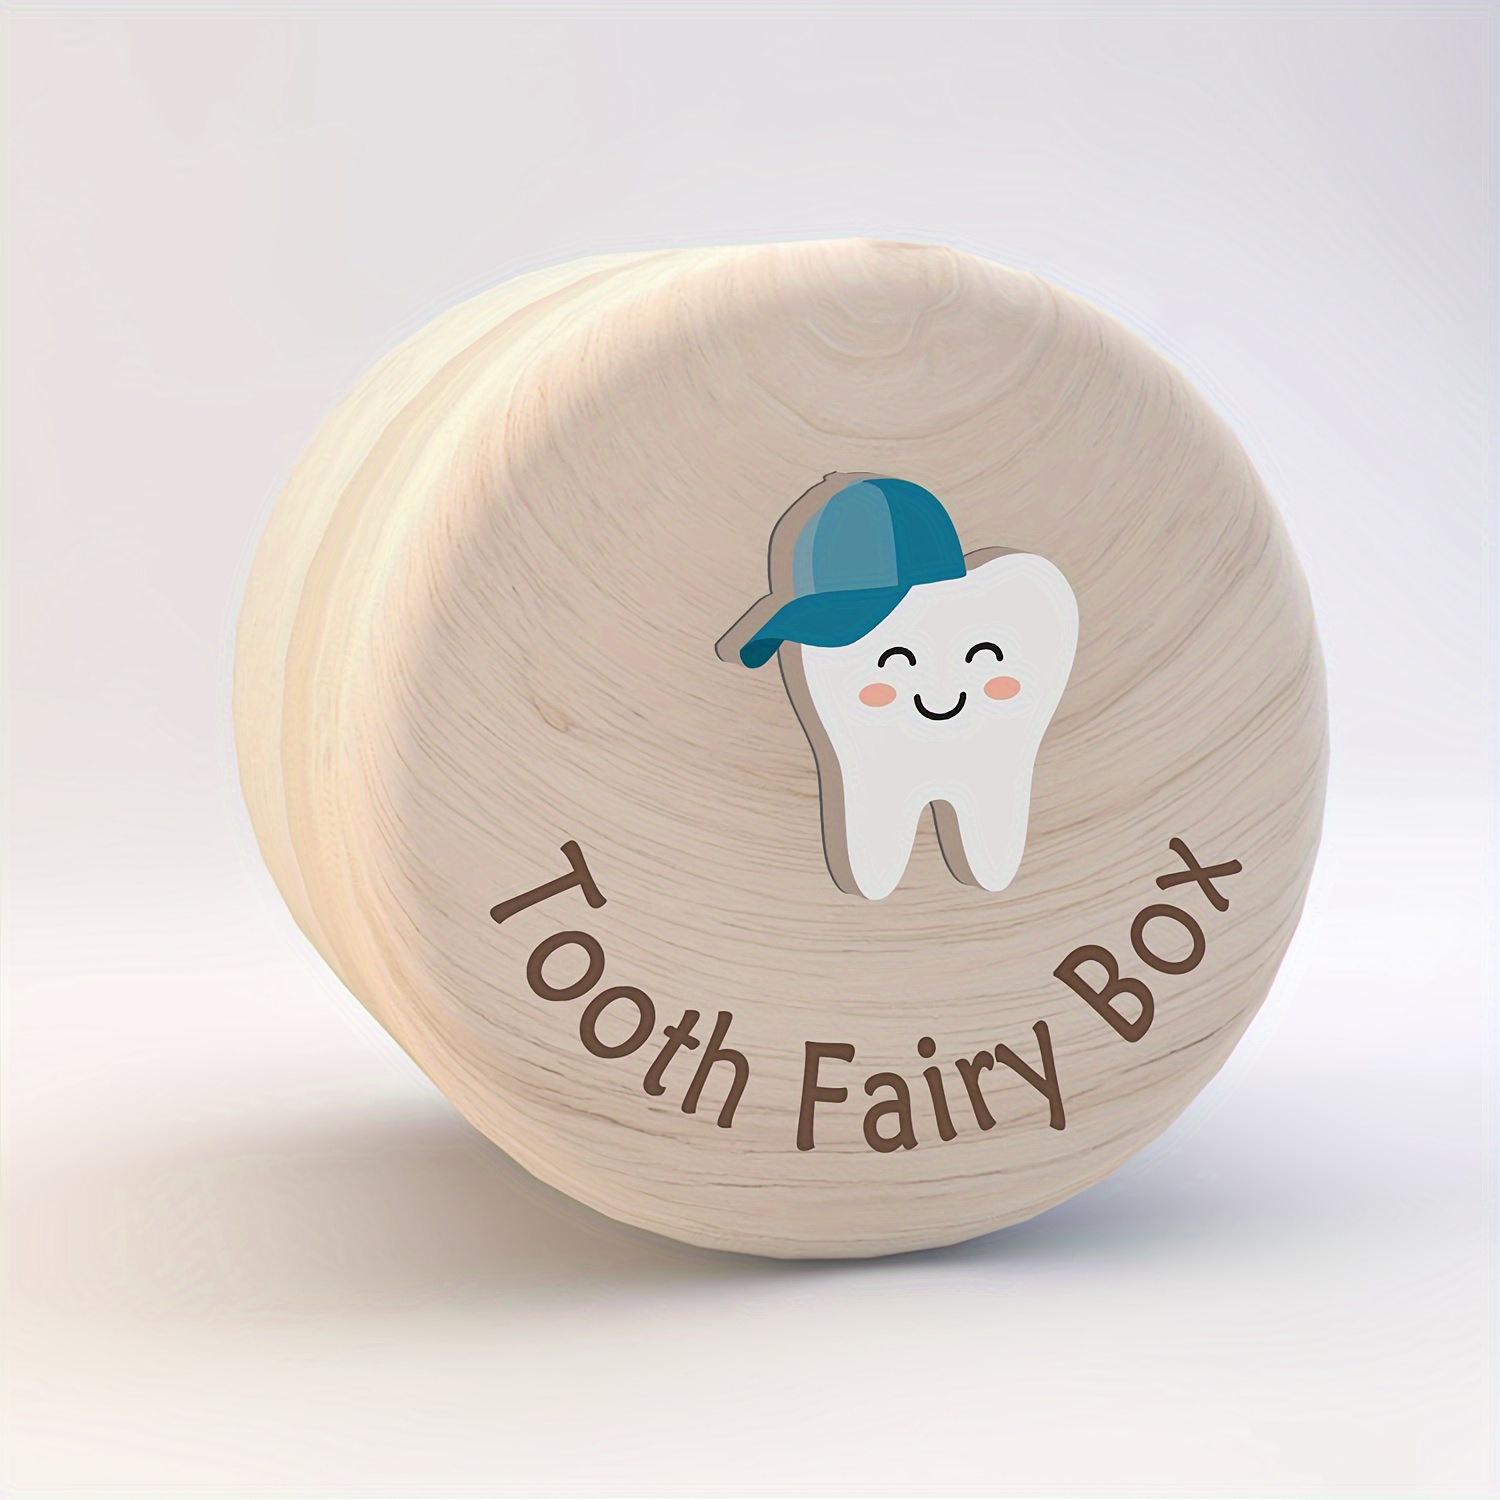 

1pc Tooth Fairy Box For Boys Girls, 3d Engraved Wooden Box, Store Gifts For Lost Teeth, Keepsake Drop Tooth Keepsake Organizer, Teeth Container Box, Baby Teeth Keepsake Storage Box